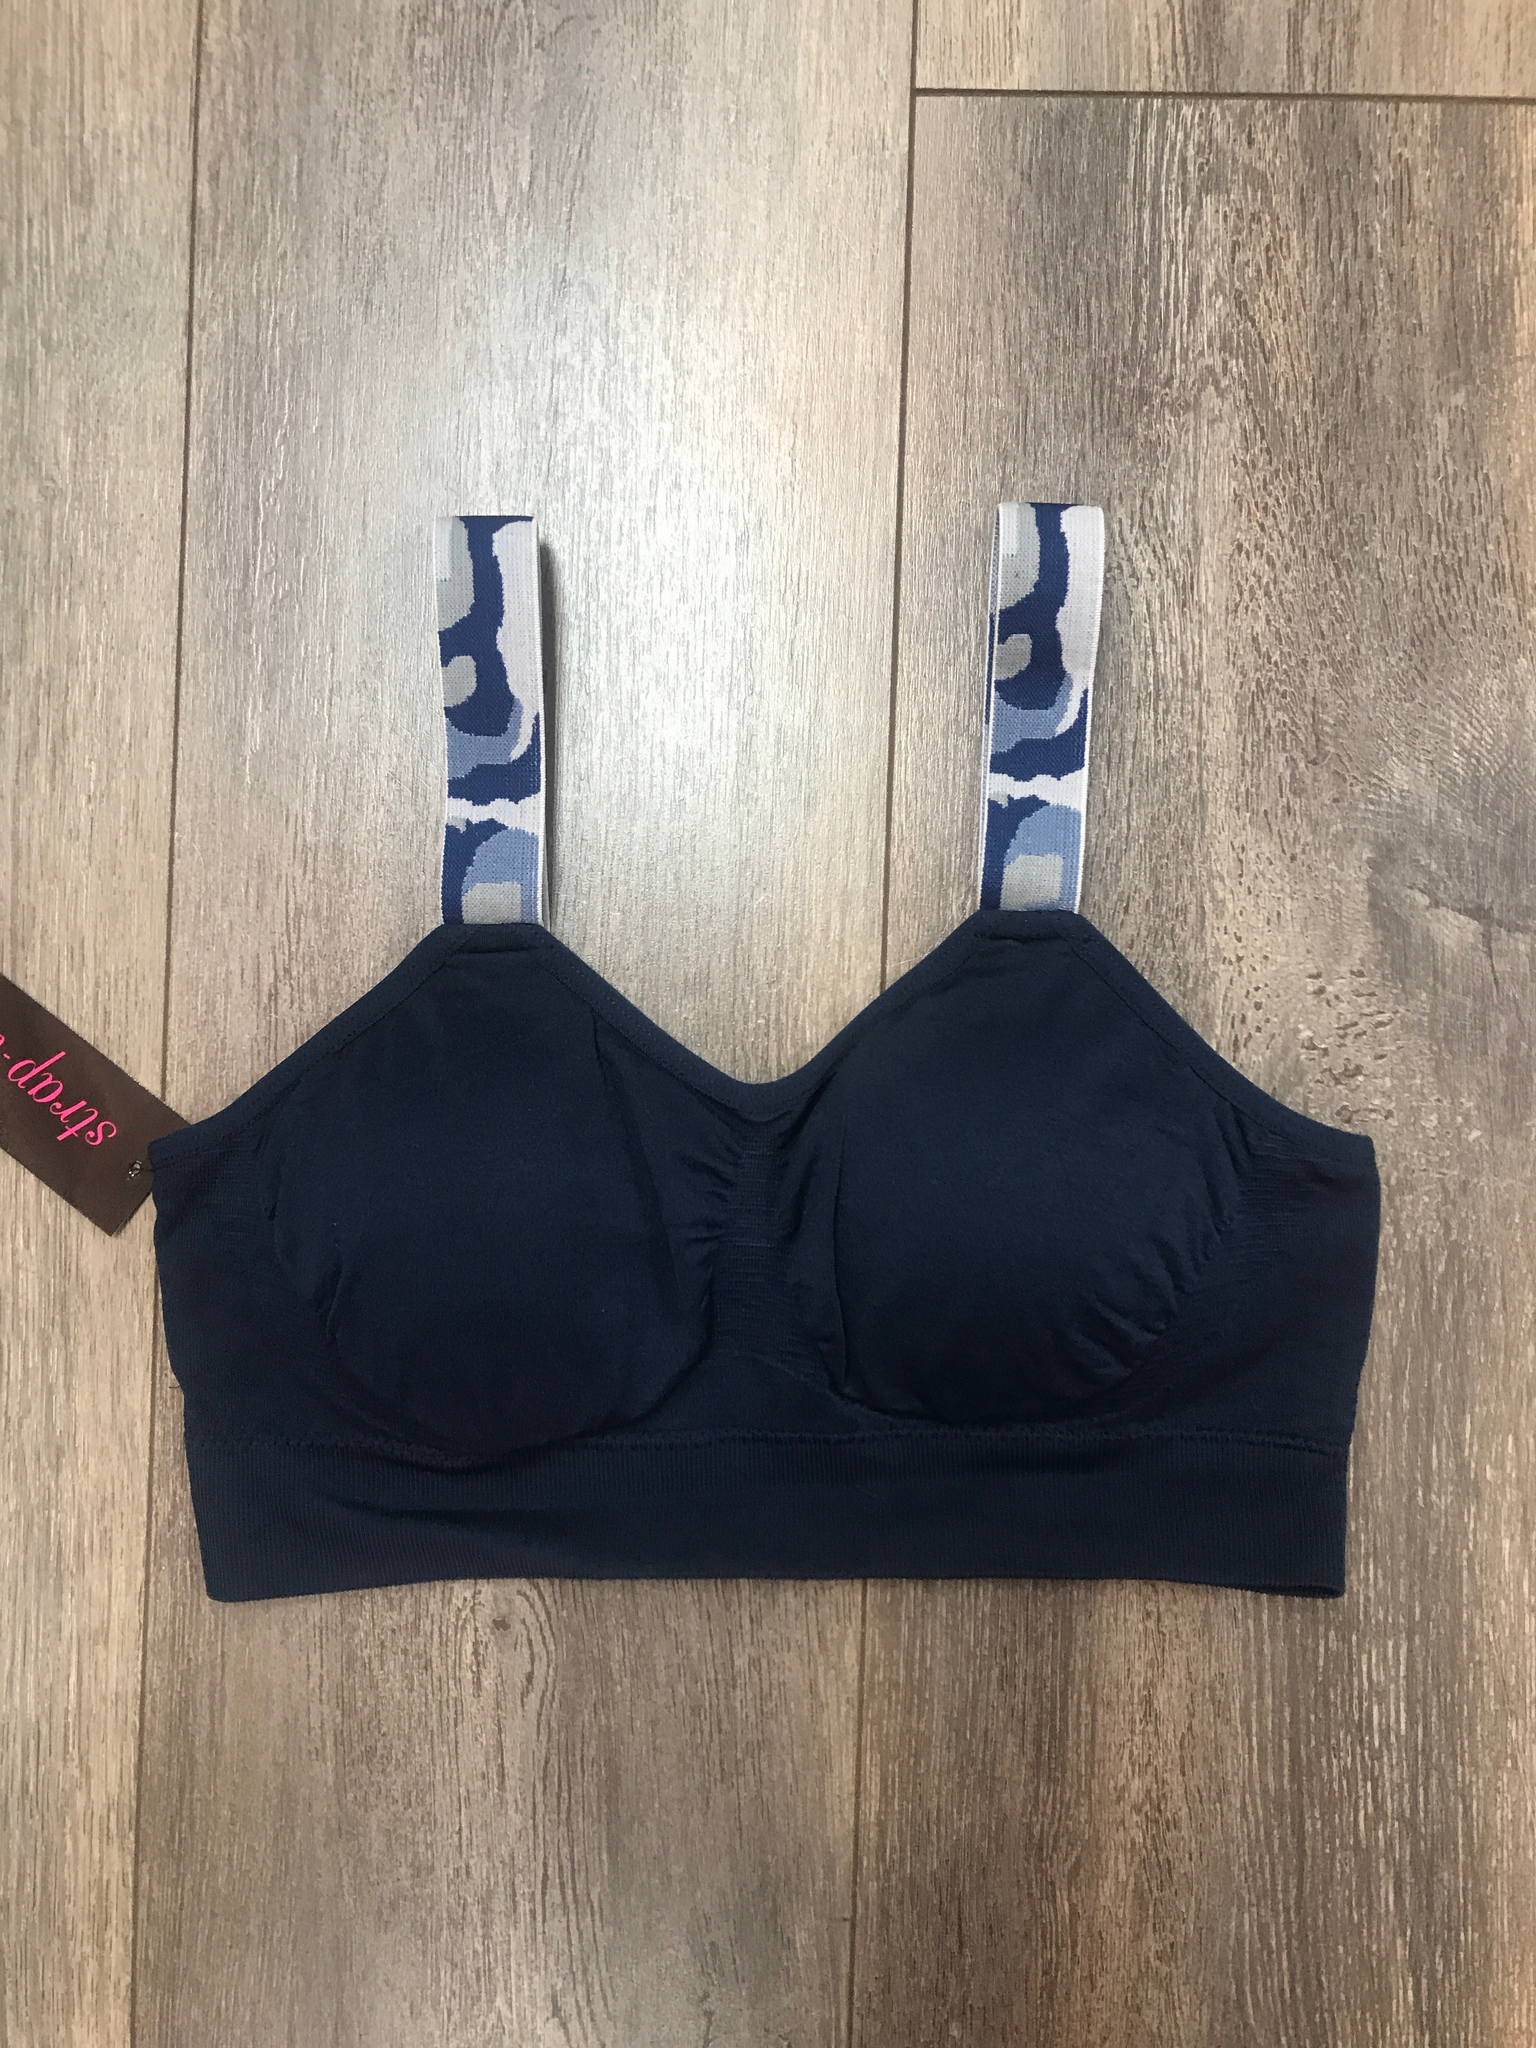 BLUE CAMO (attached to our navy bra)